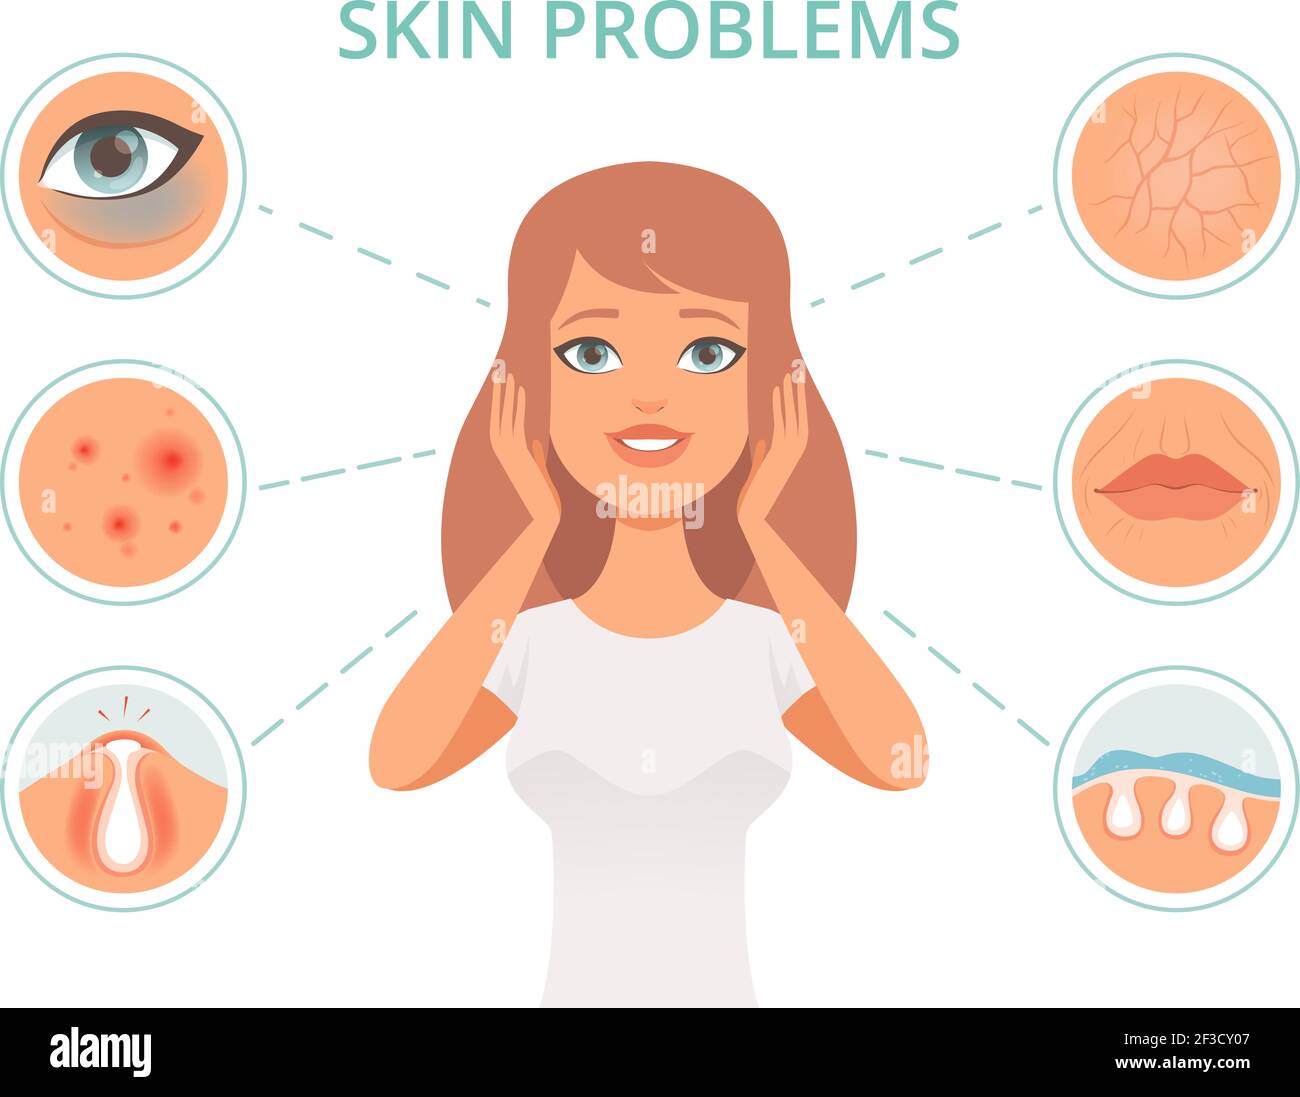 Skin problems. Beauty woman scrub care face infection darkness scrubs oily face cleanse vector symbols Stock Vector